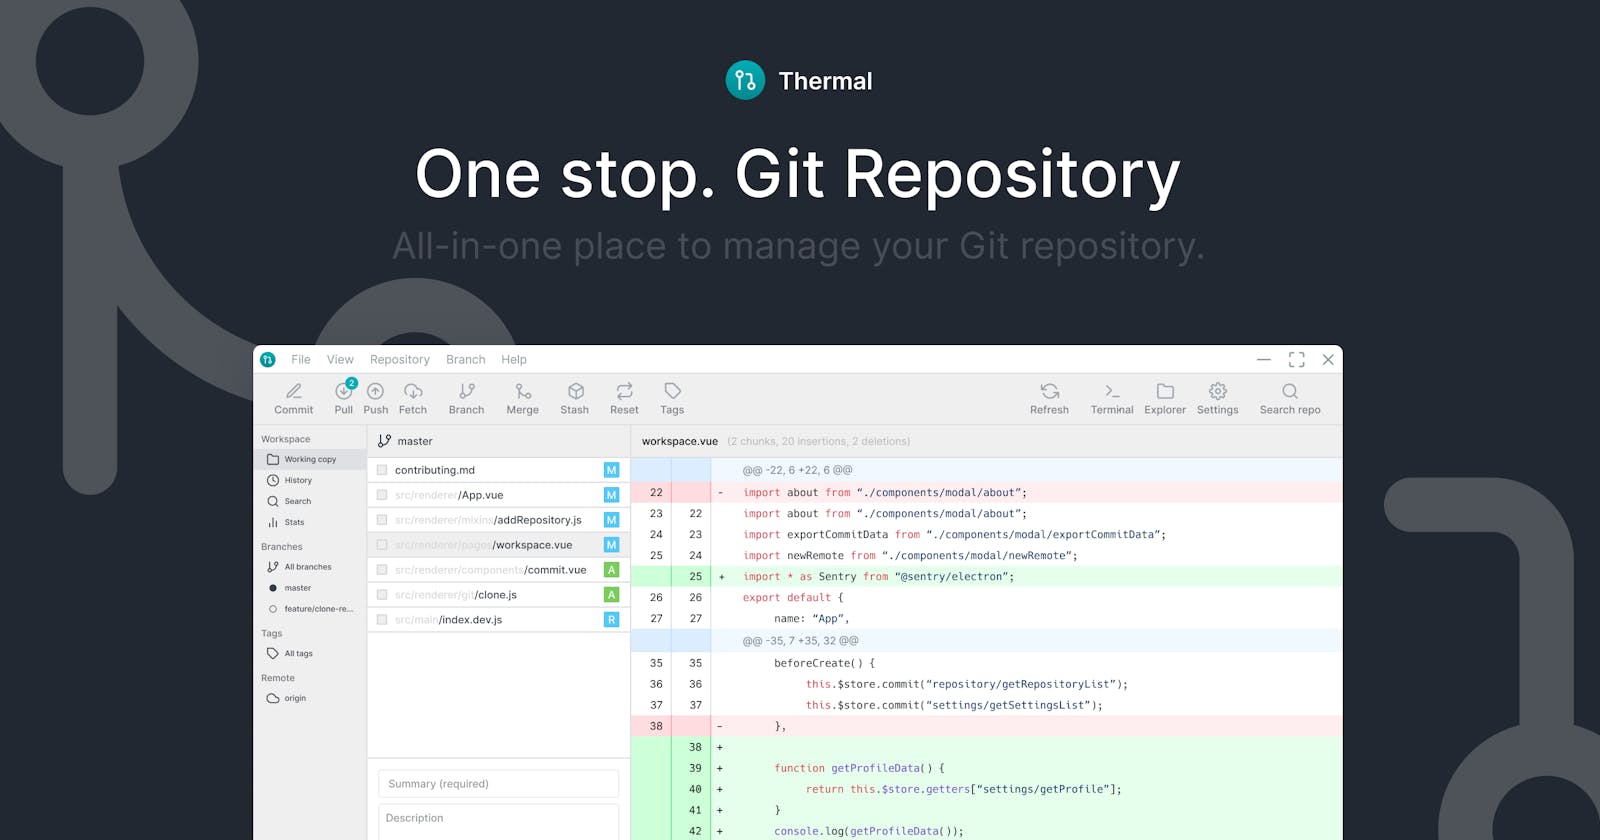 One stop to all Git repository